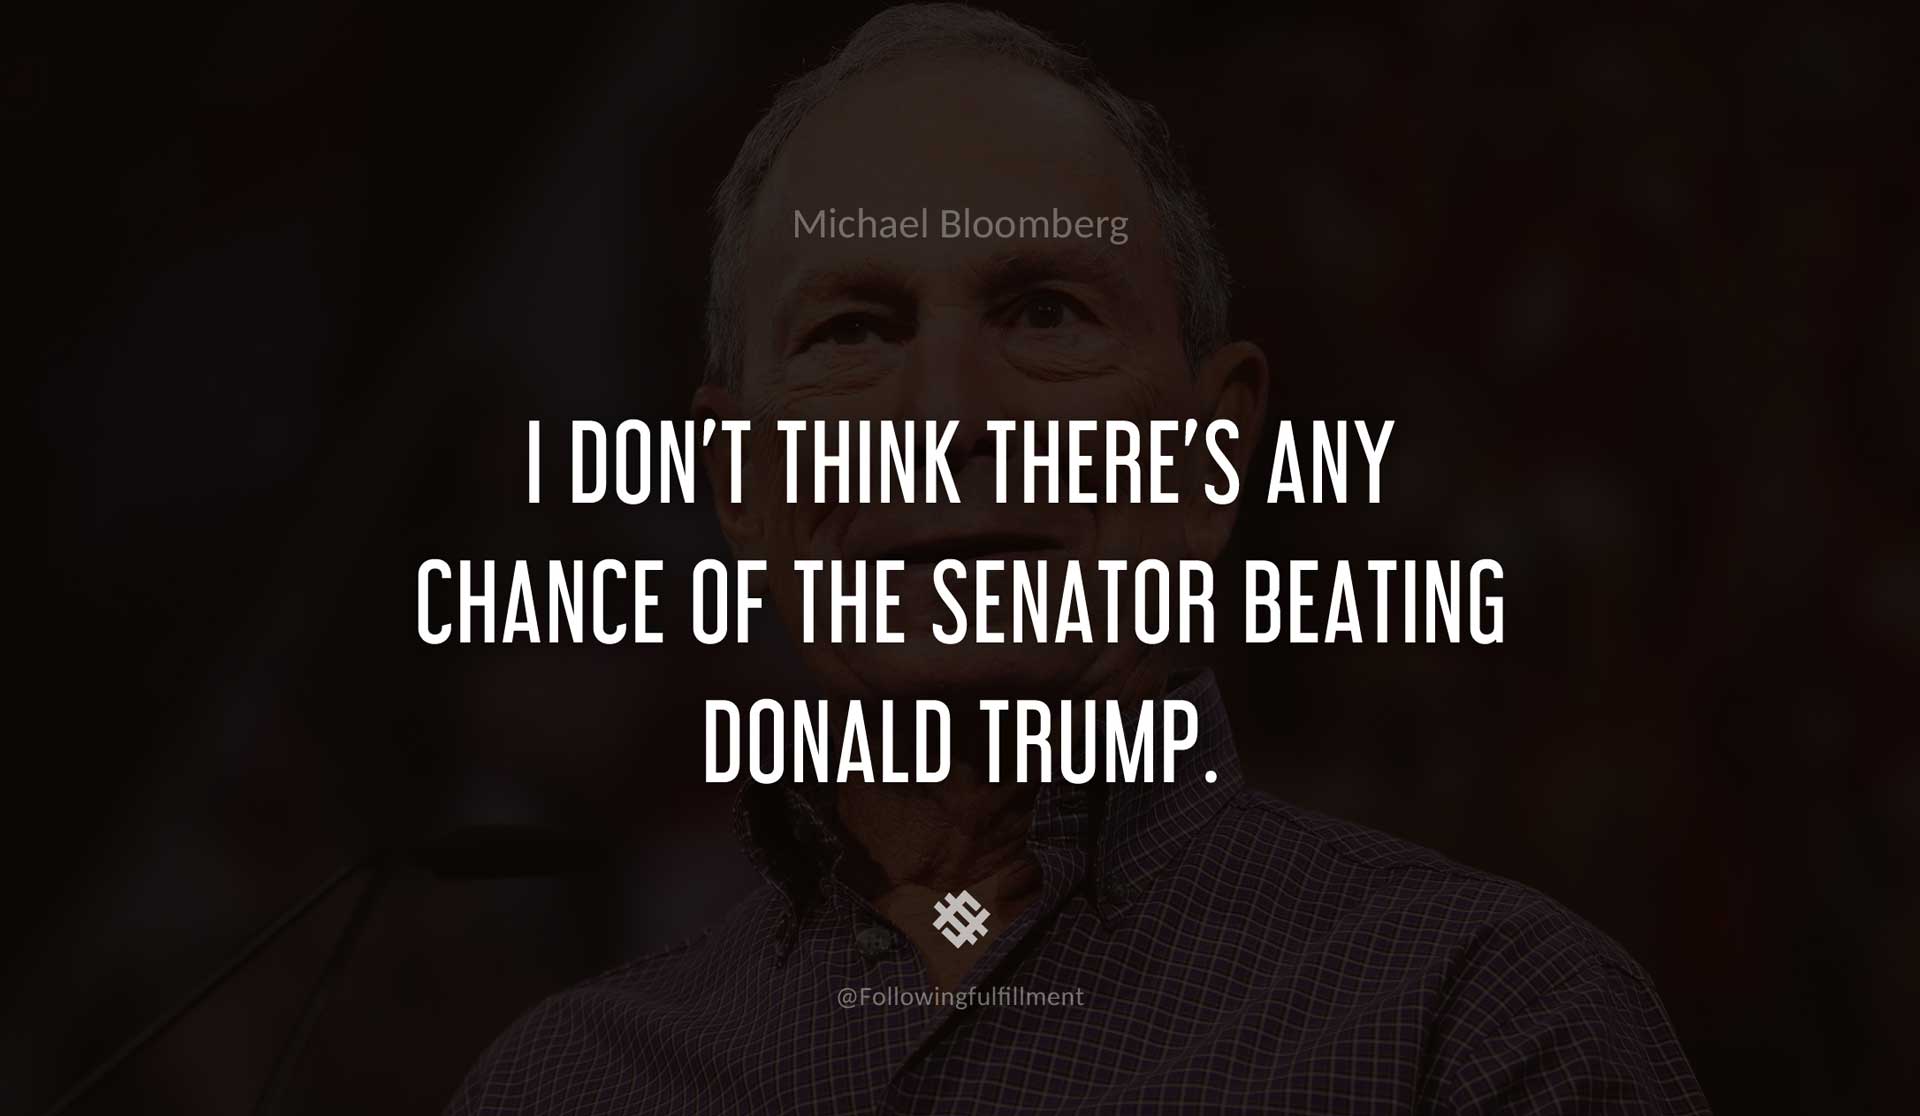 I-don't-think-there's-any-chance-of-the-senator-beating-donald-trump.-MICHAEL-BLOOMBERG-Quote.jpg